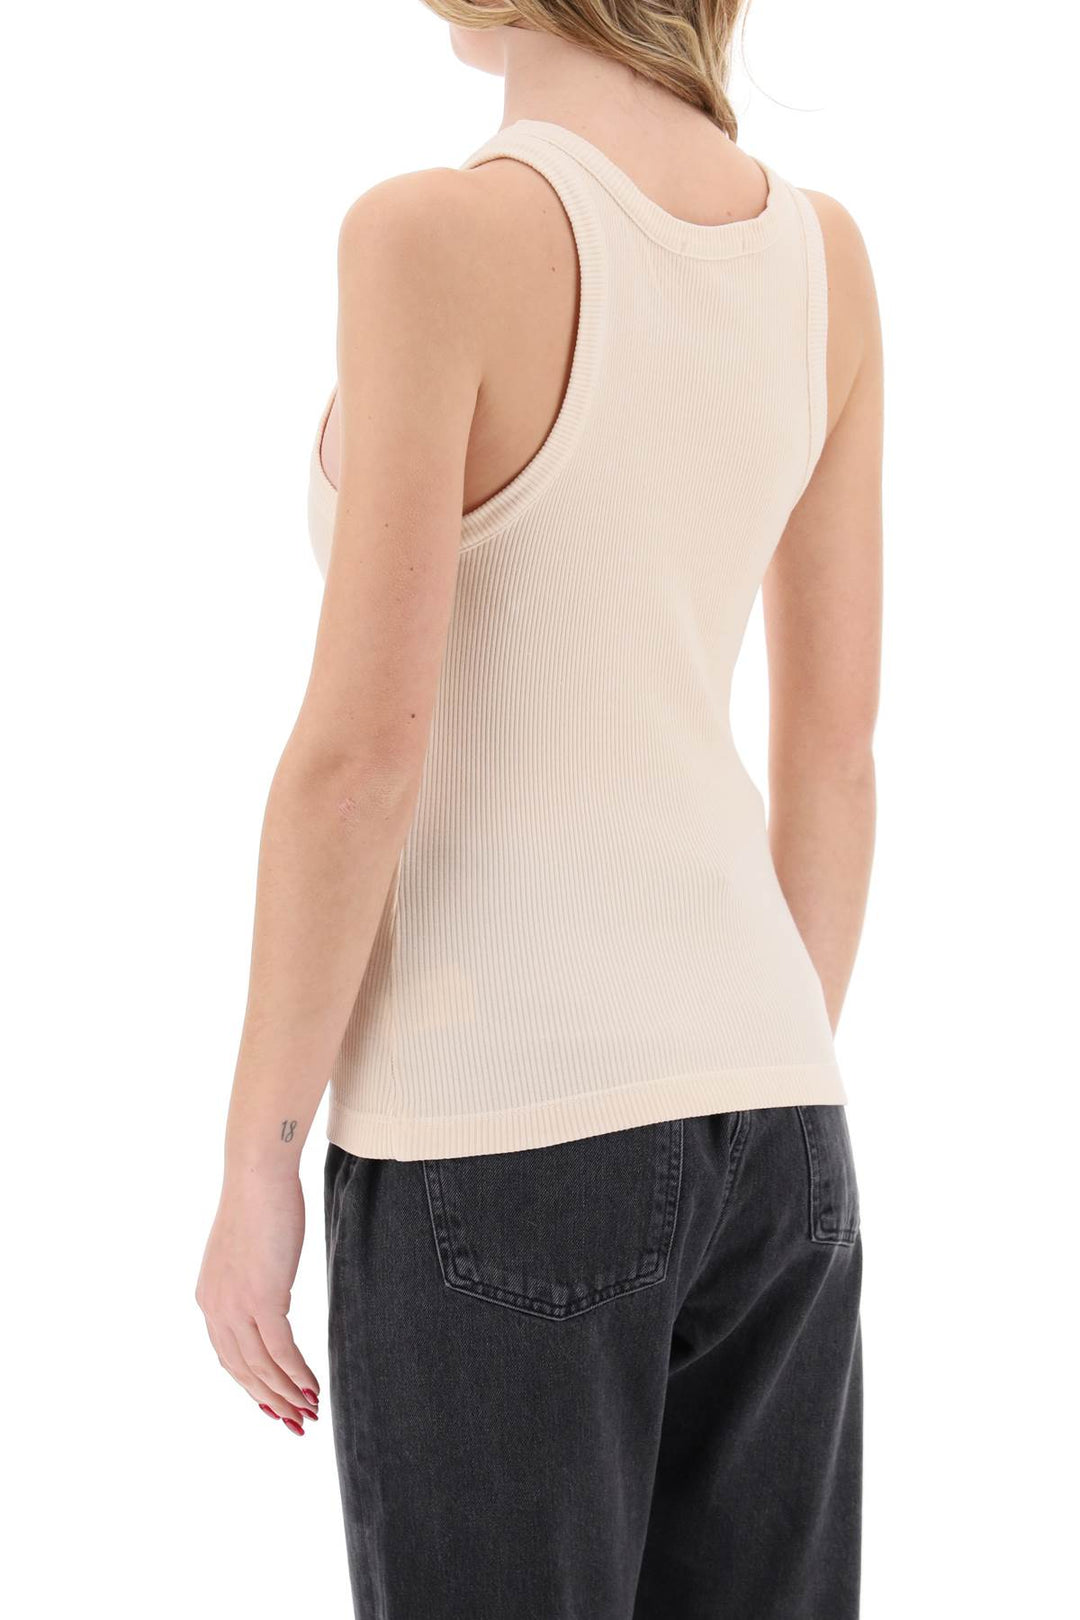 Agolde Replace With Double Quoteribbed Sleeveless Top B   Neutro